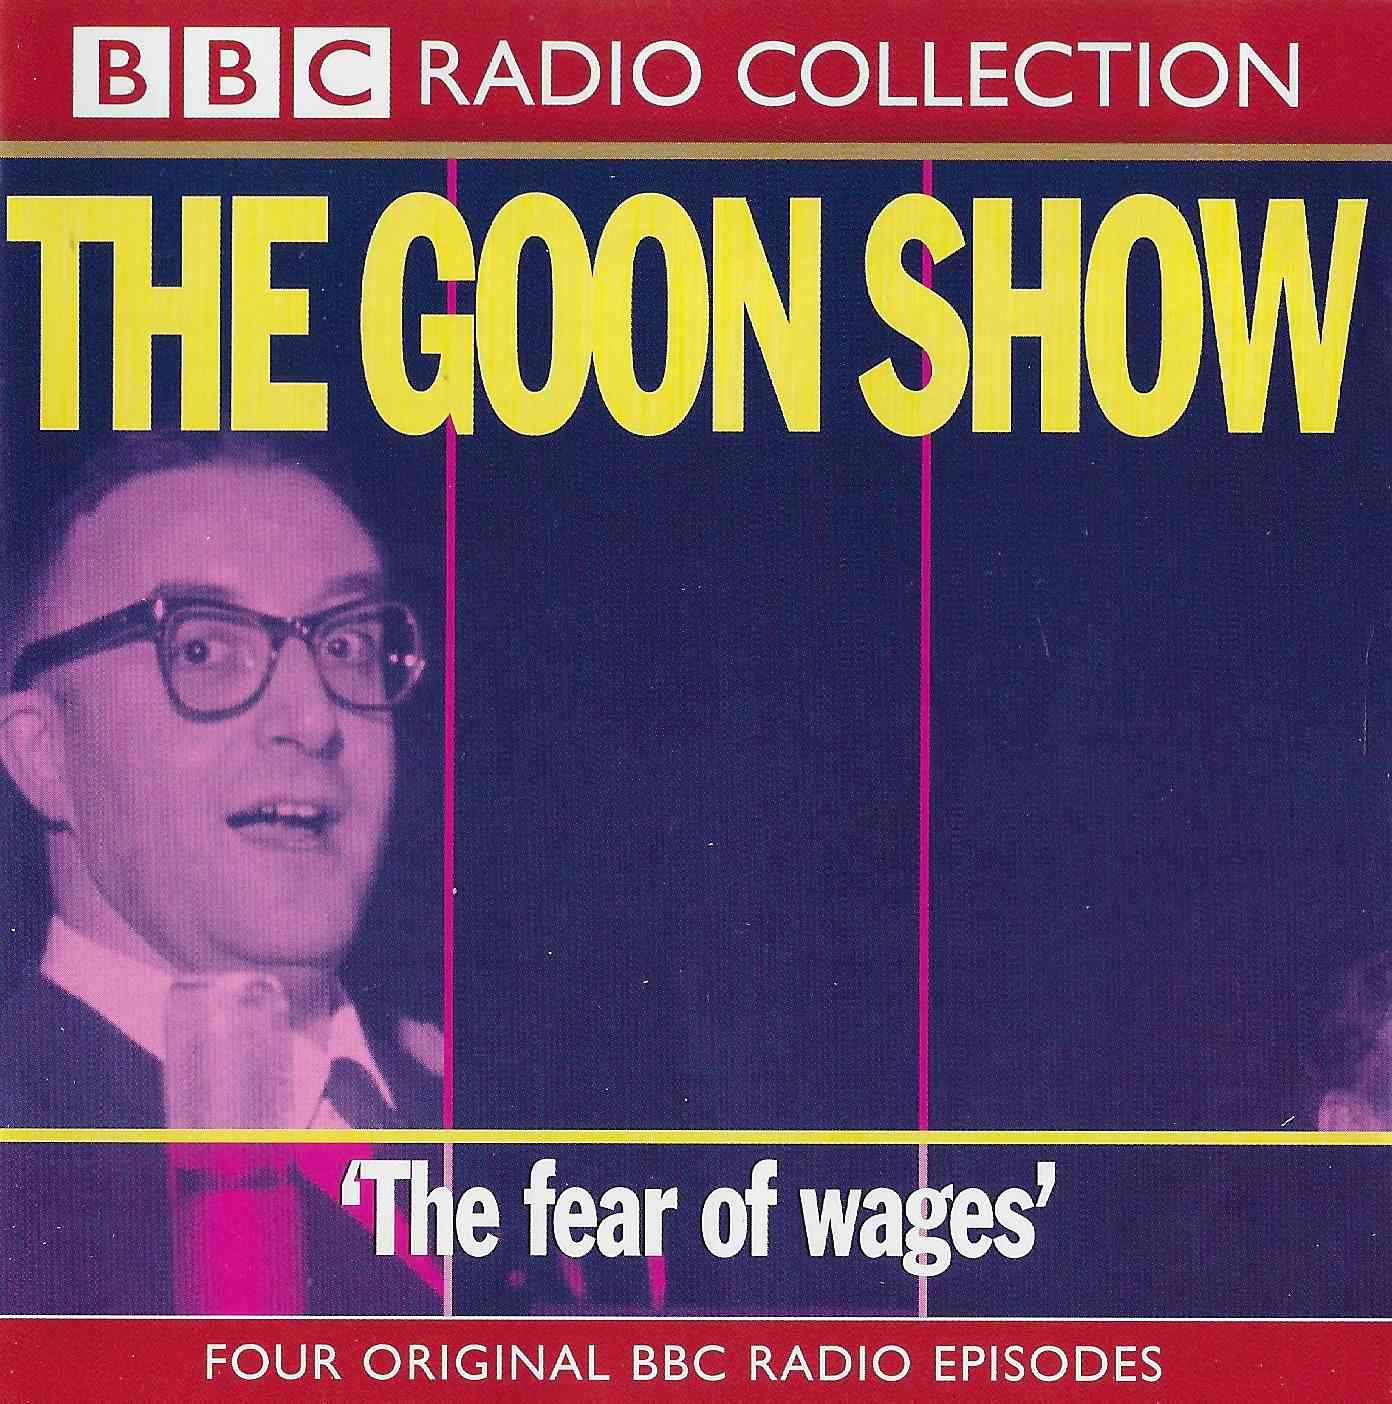 Picture of ISBN 0-563-53629-2 The Goon Show 20 - The fear of wages CD by artist Spike Milligan / Larry Stephens from the BBC records and Tapes library